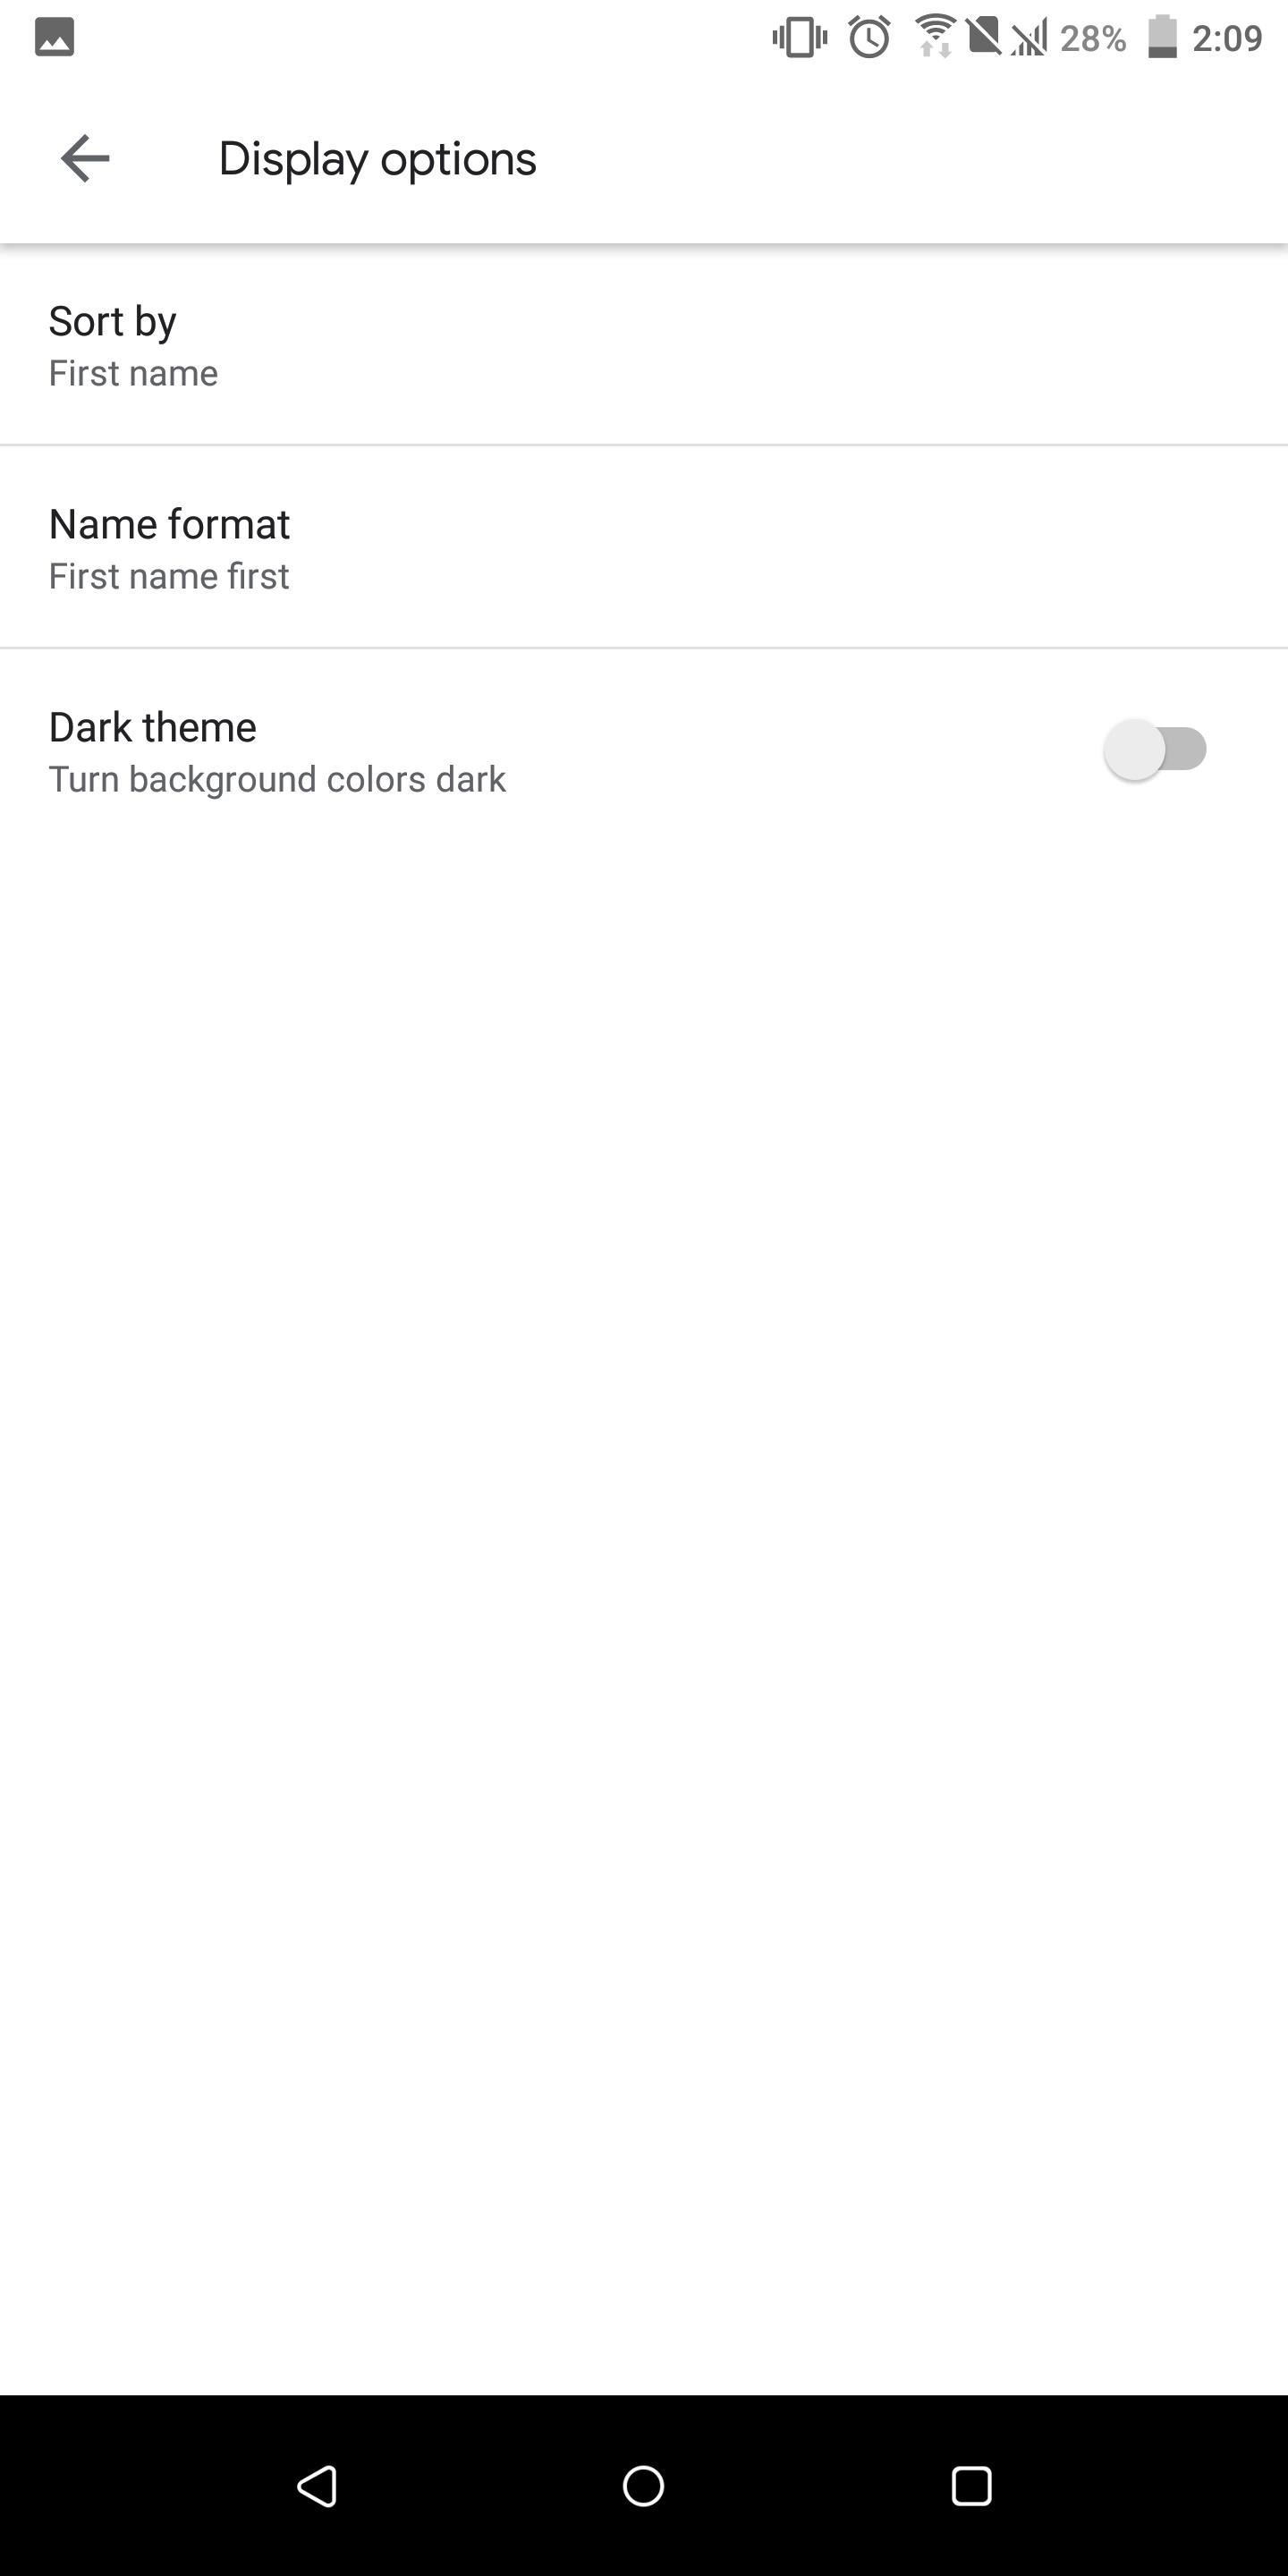 How to Enable Dark Mode in the Google Phone App